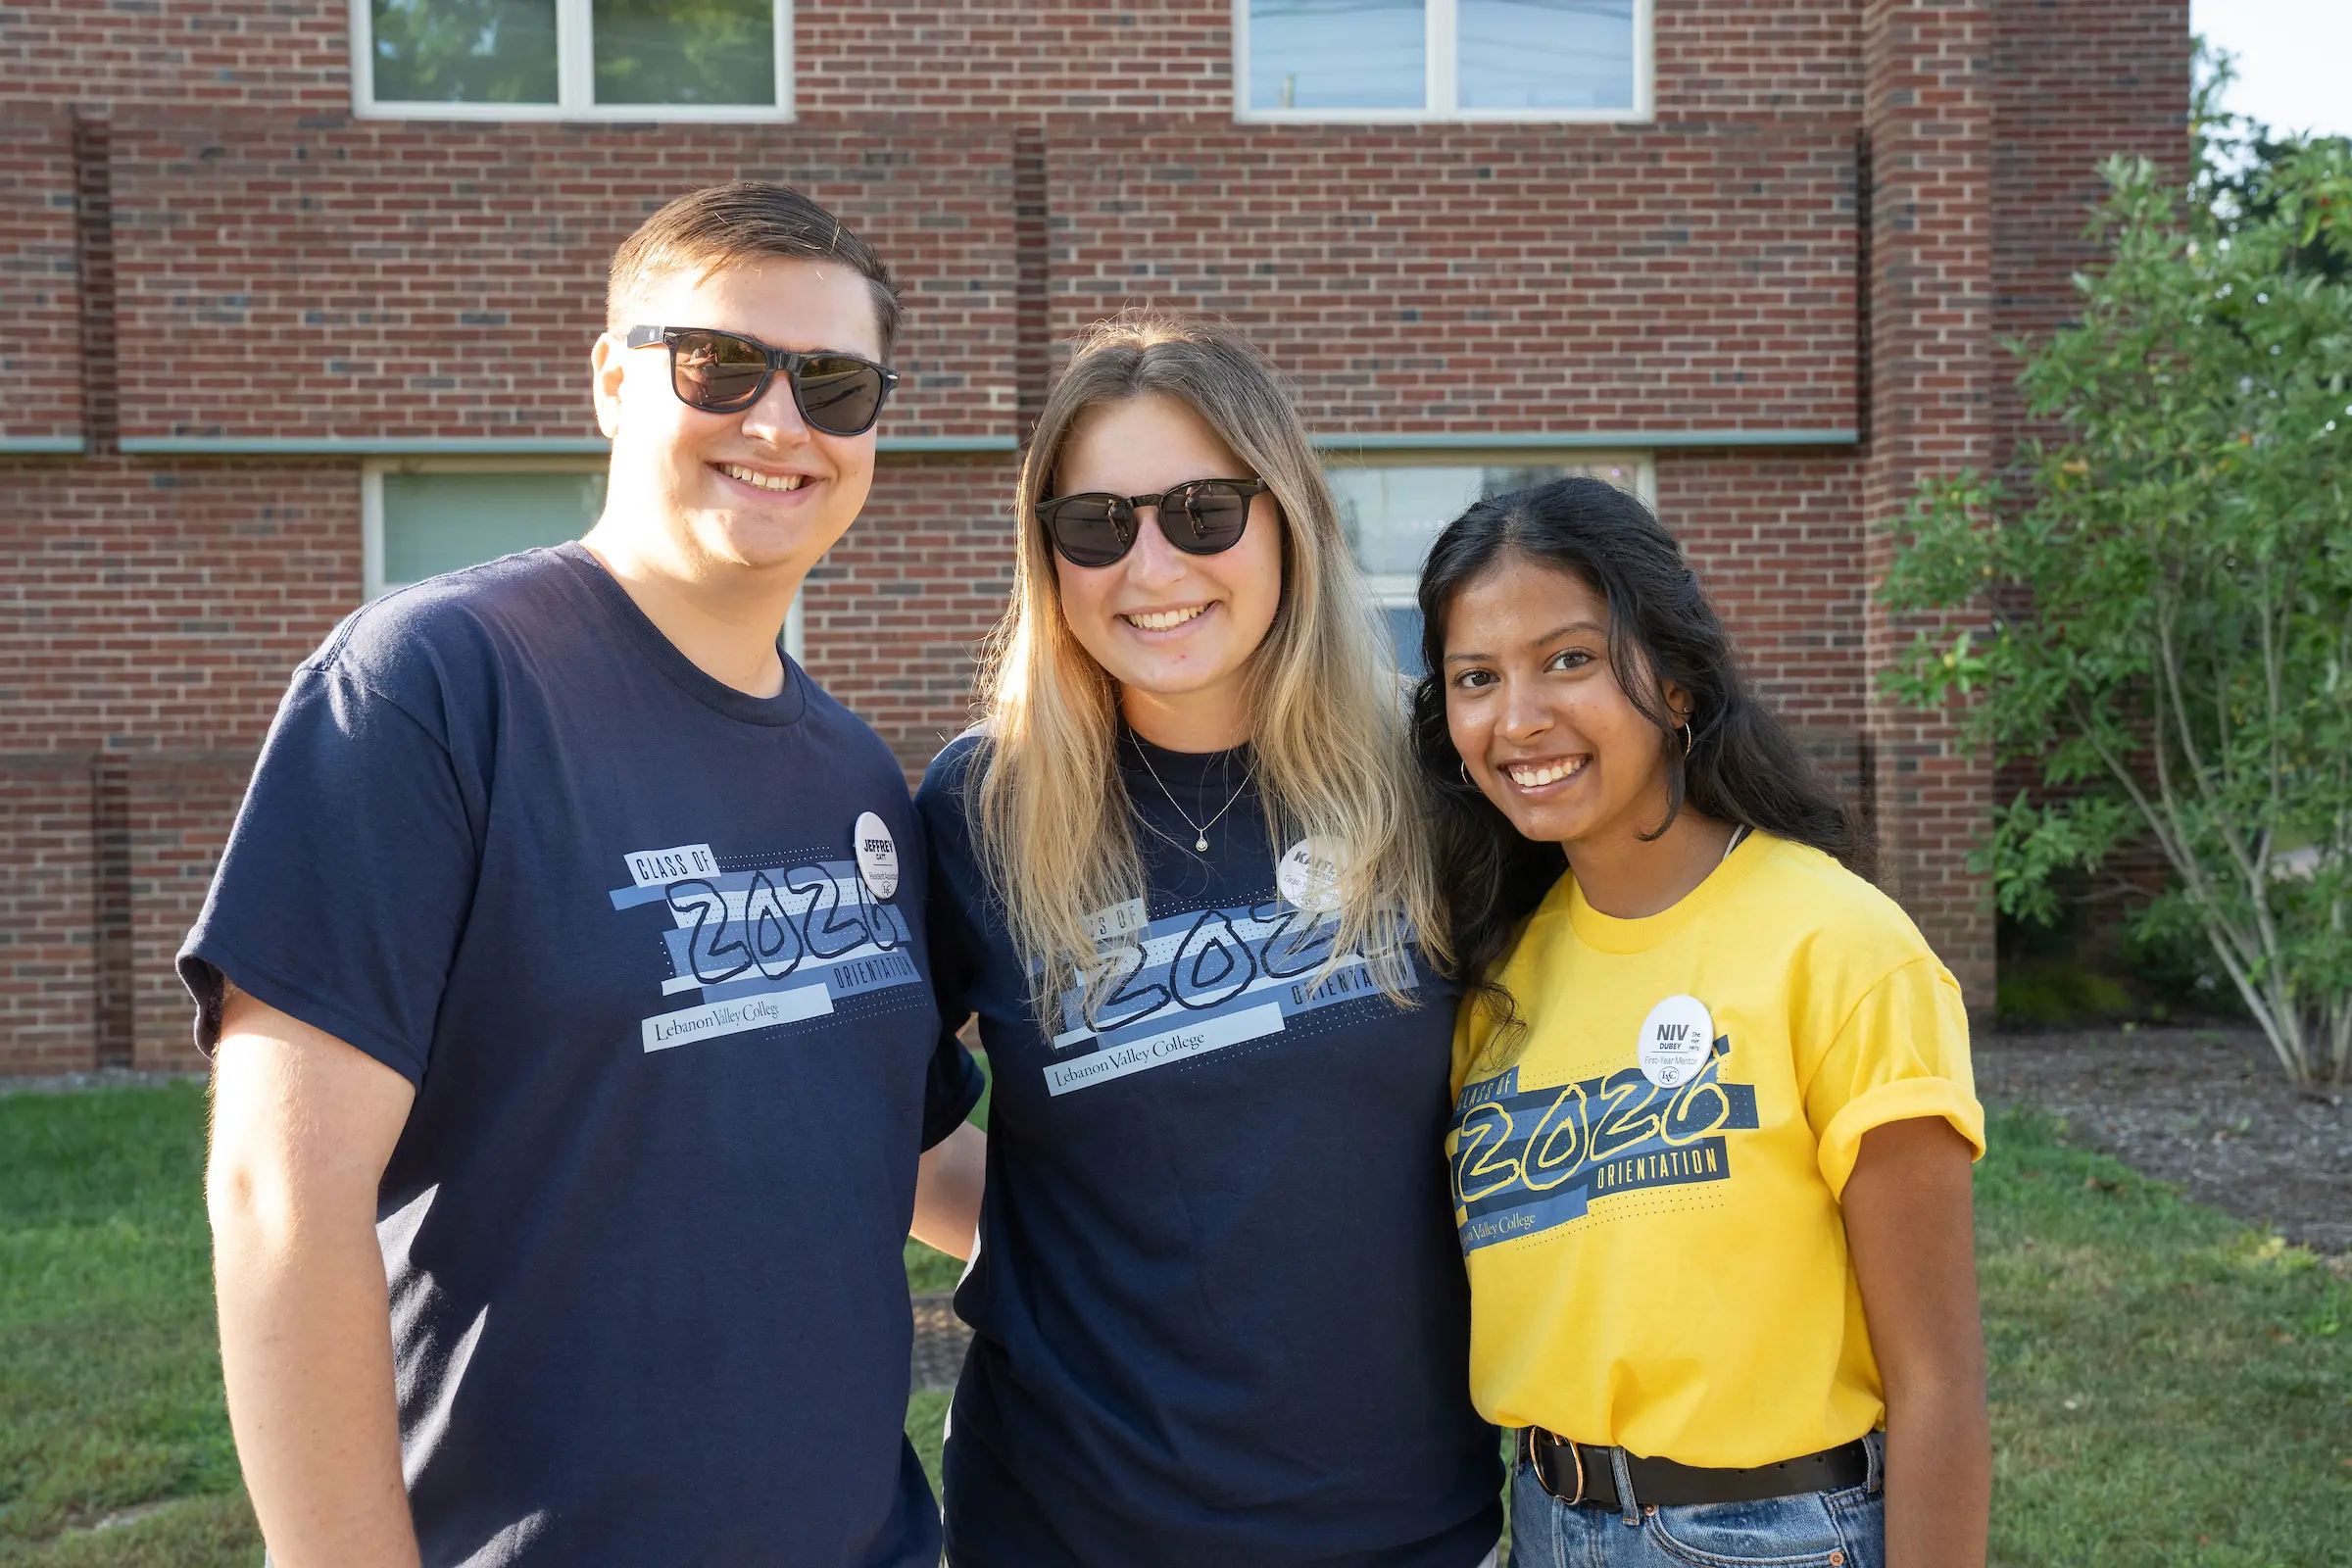 LVC students pose on move-in day